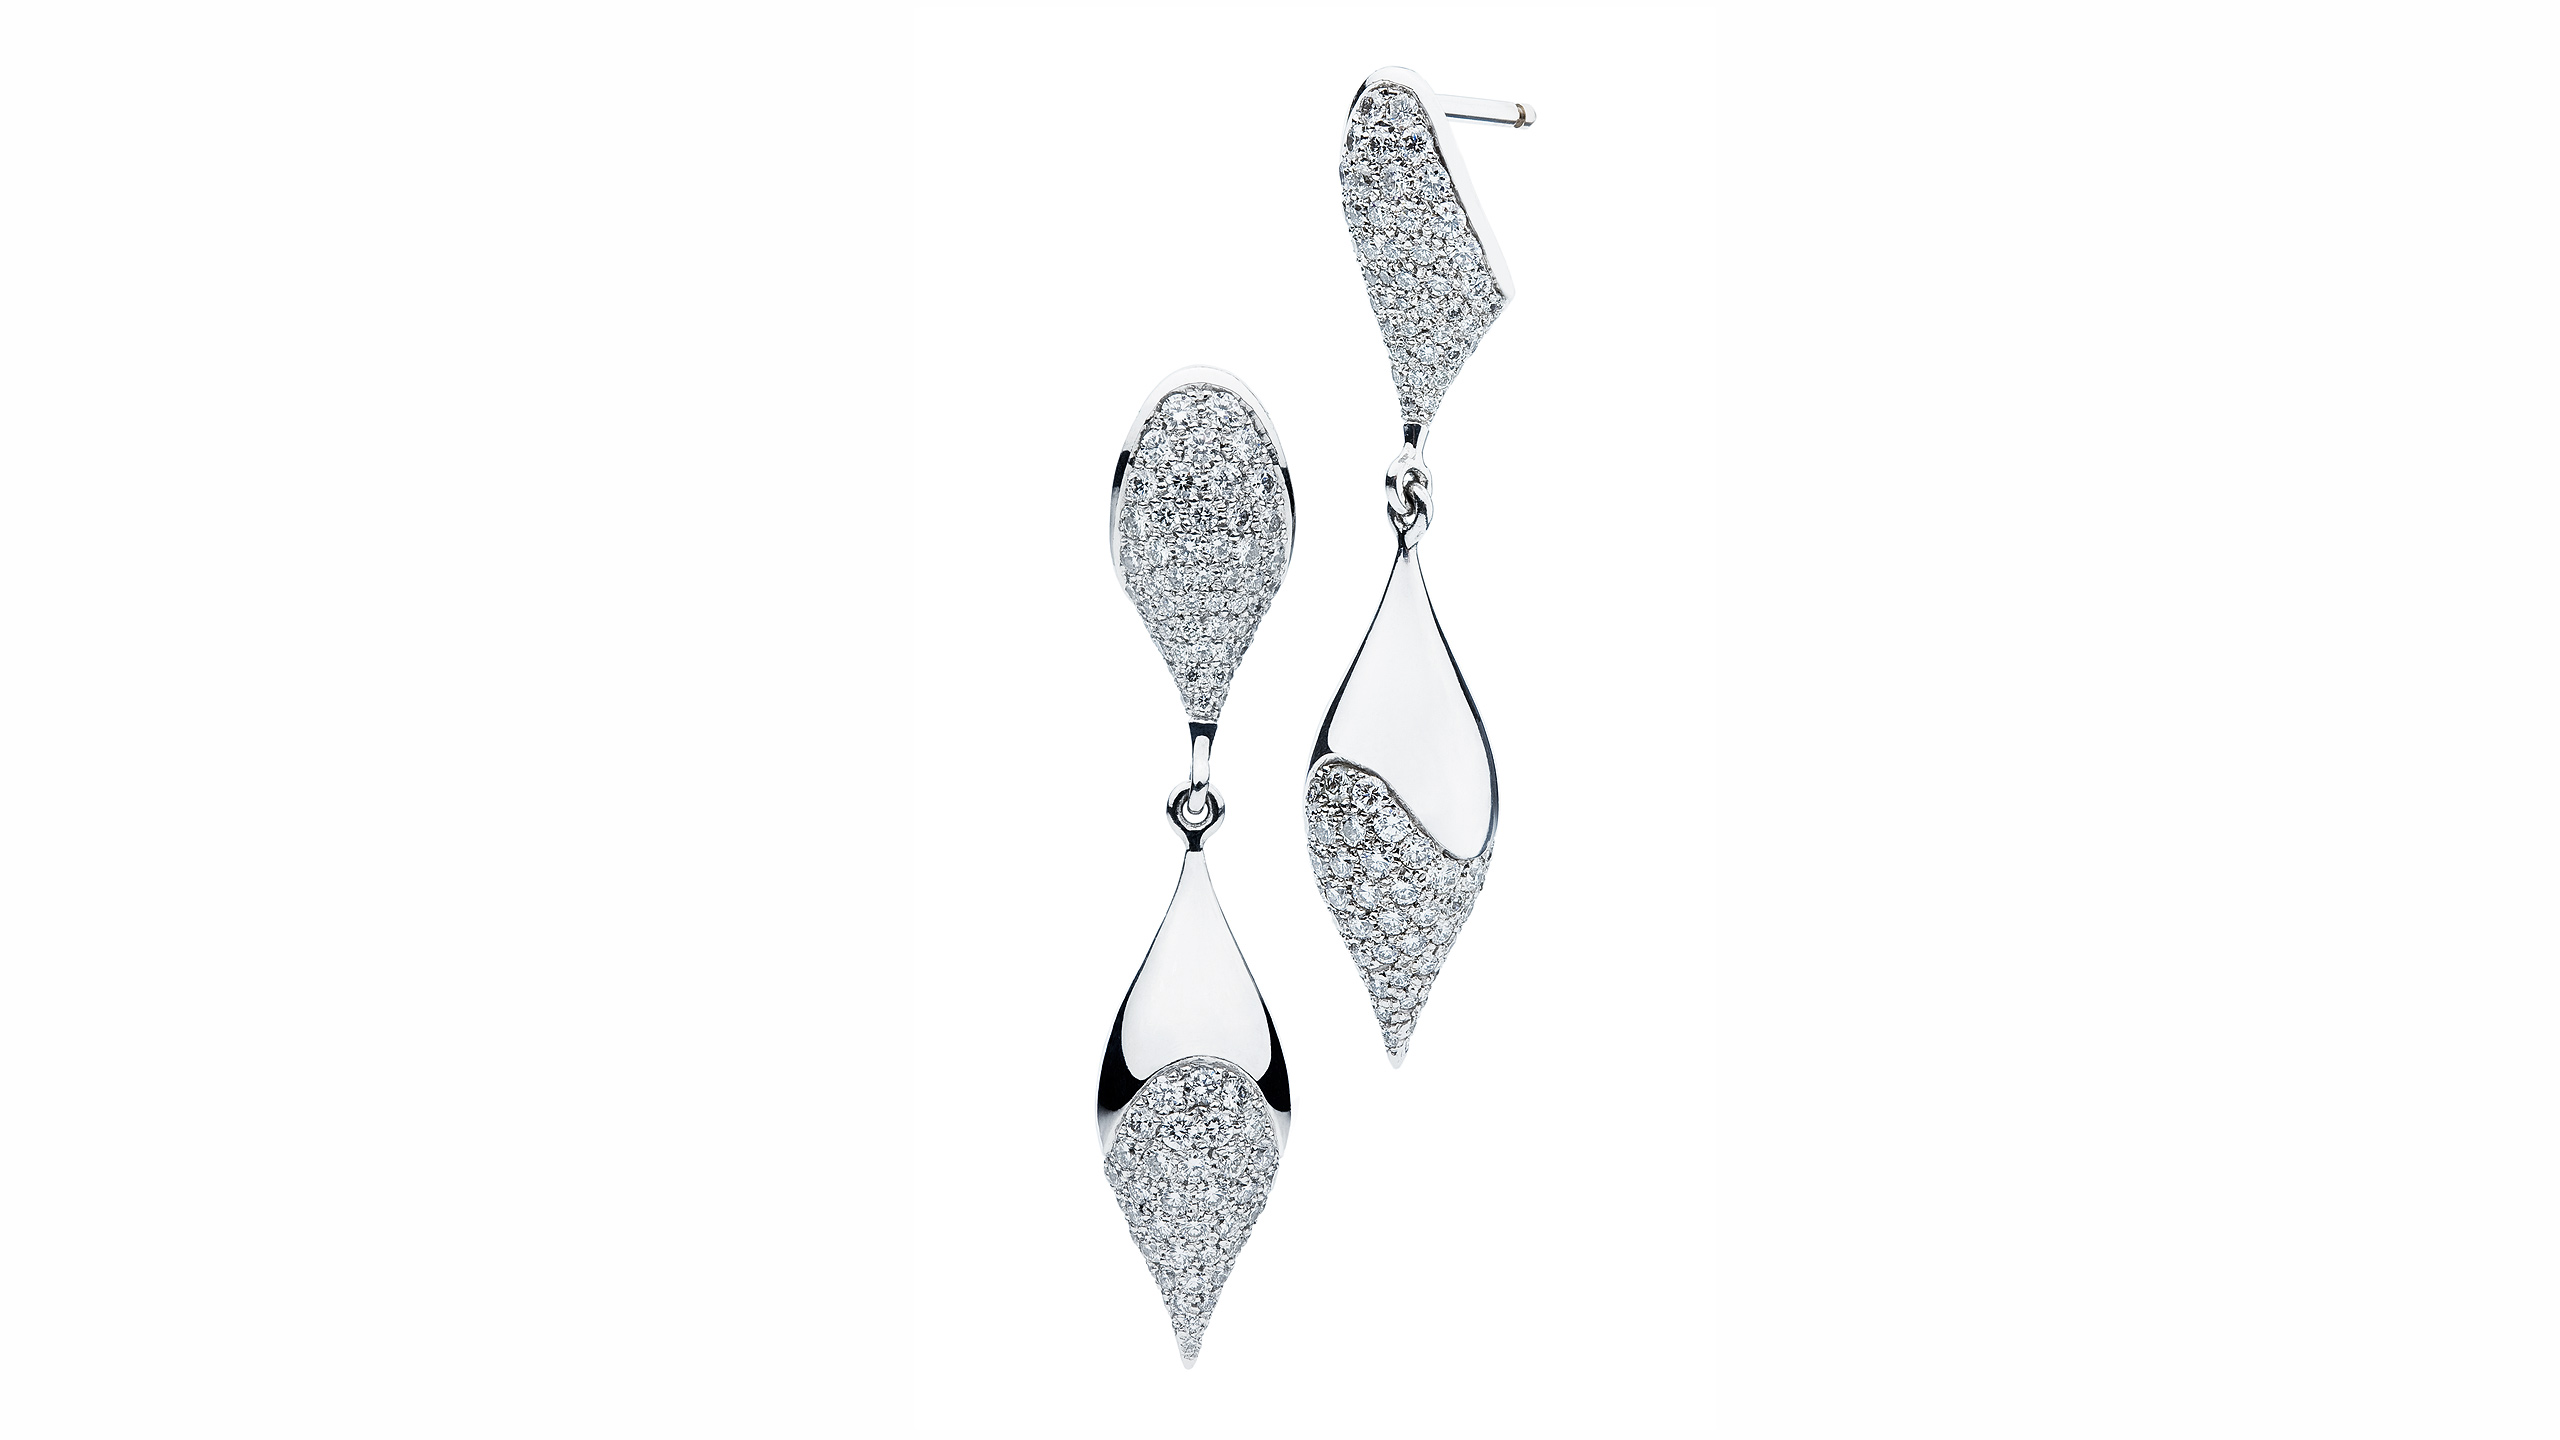 https://towejewels.com/wp-content/uploads/2012/02/Cupido_earrings_combined_2560_Web.jpg